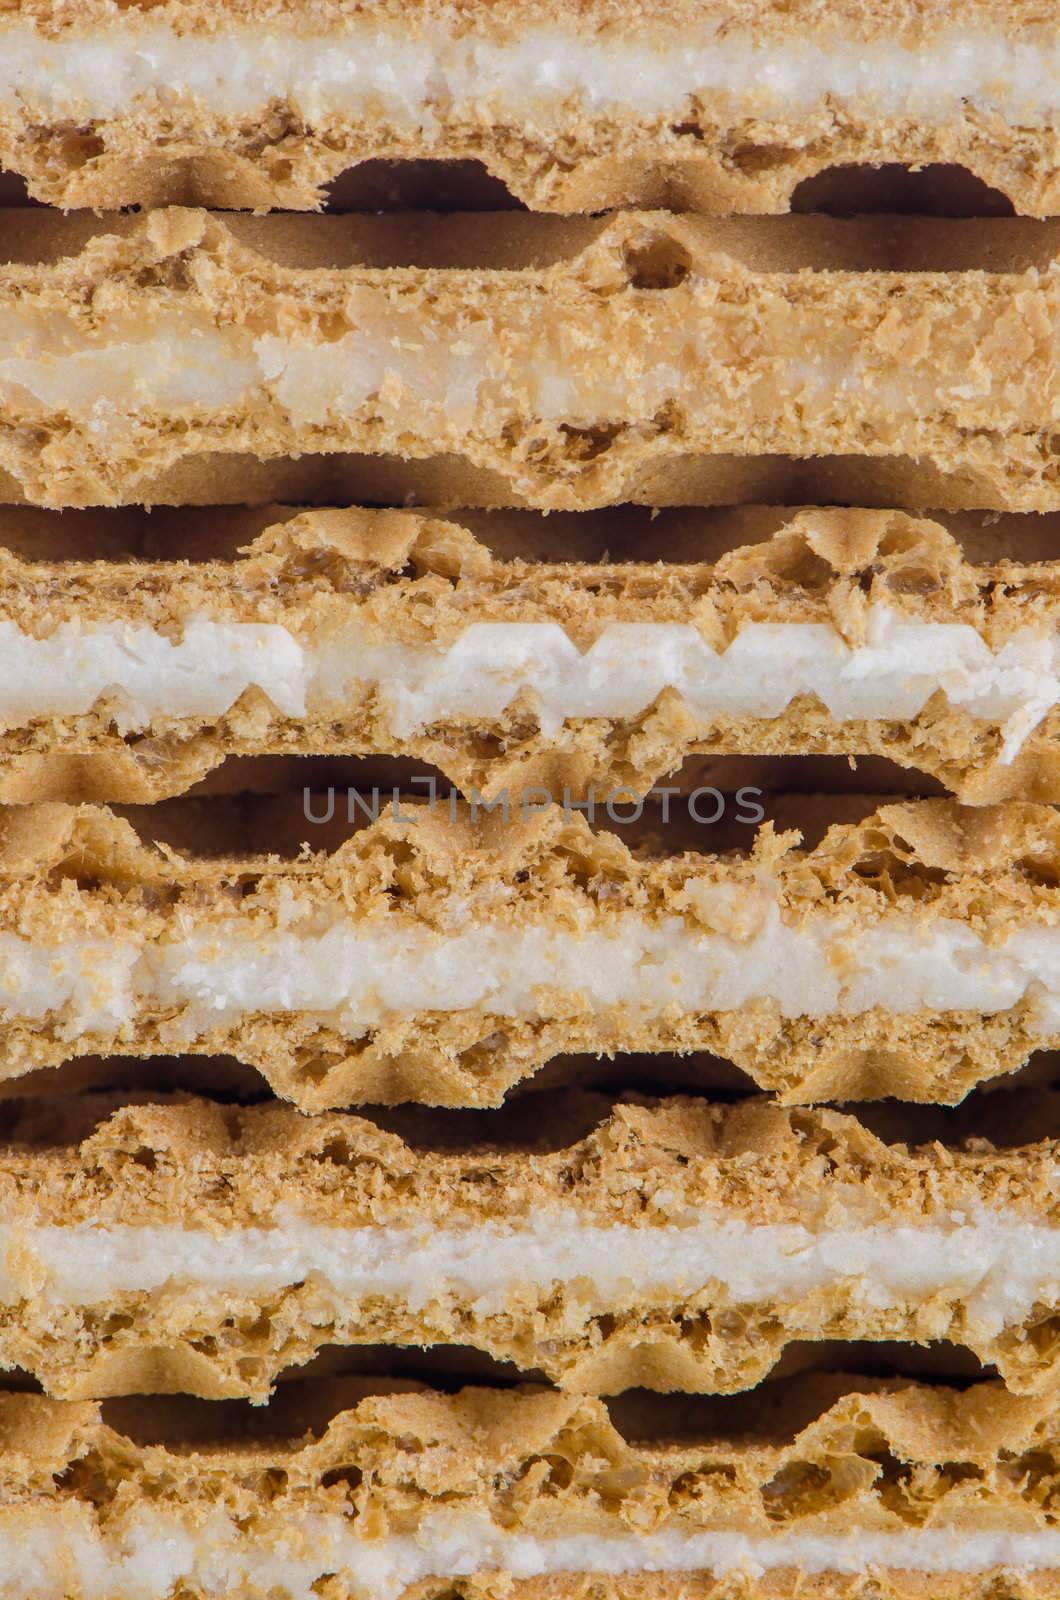 Waffle texture background. Macro front view.